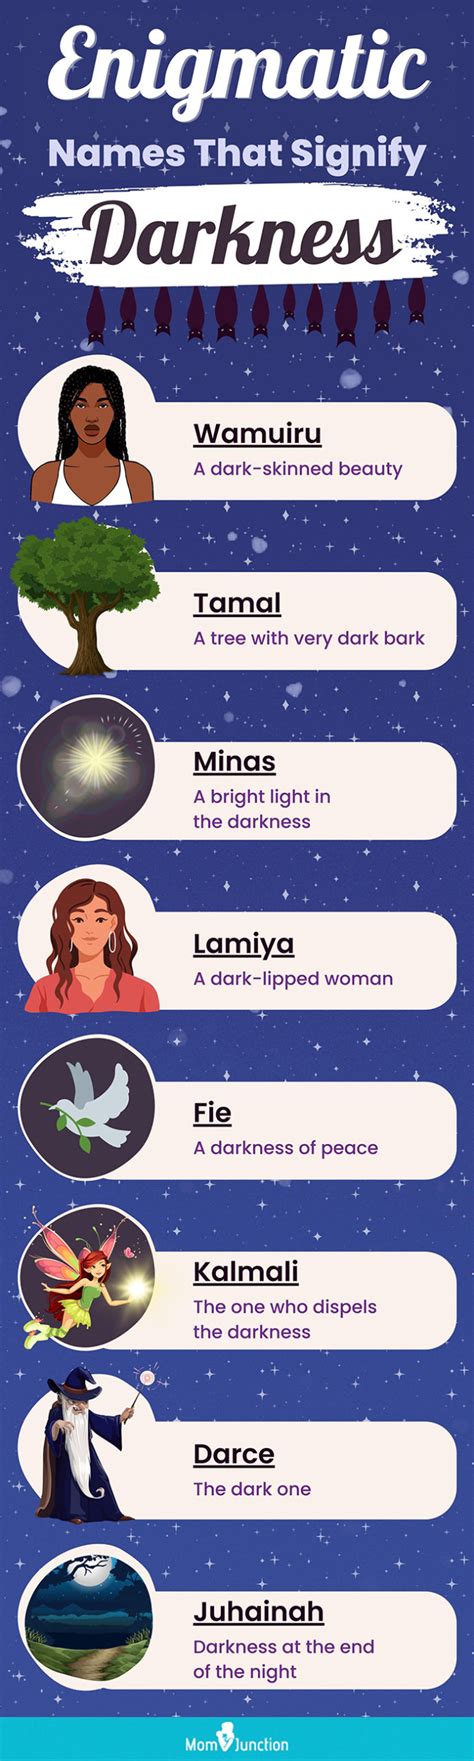 english names meaning darkness